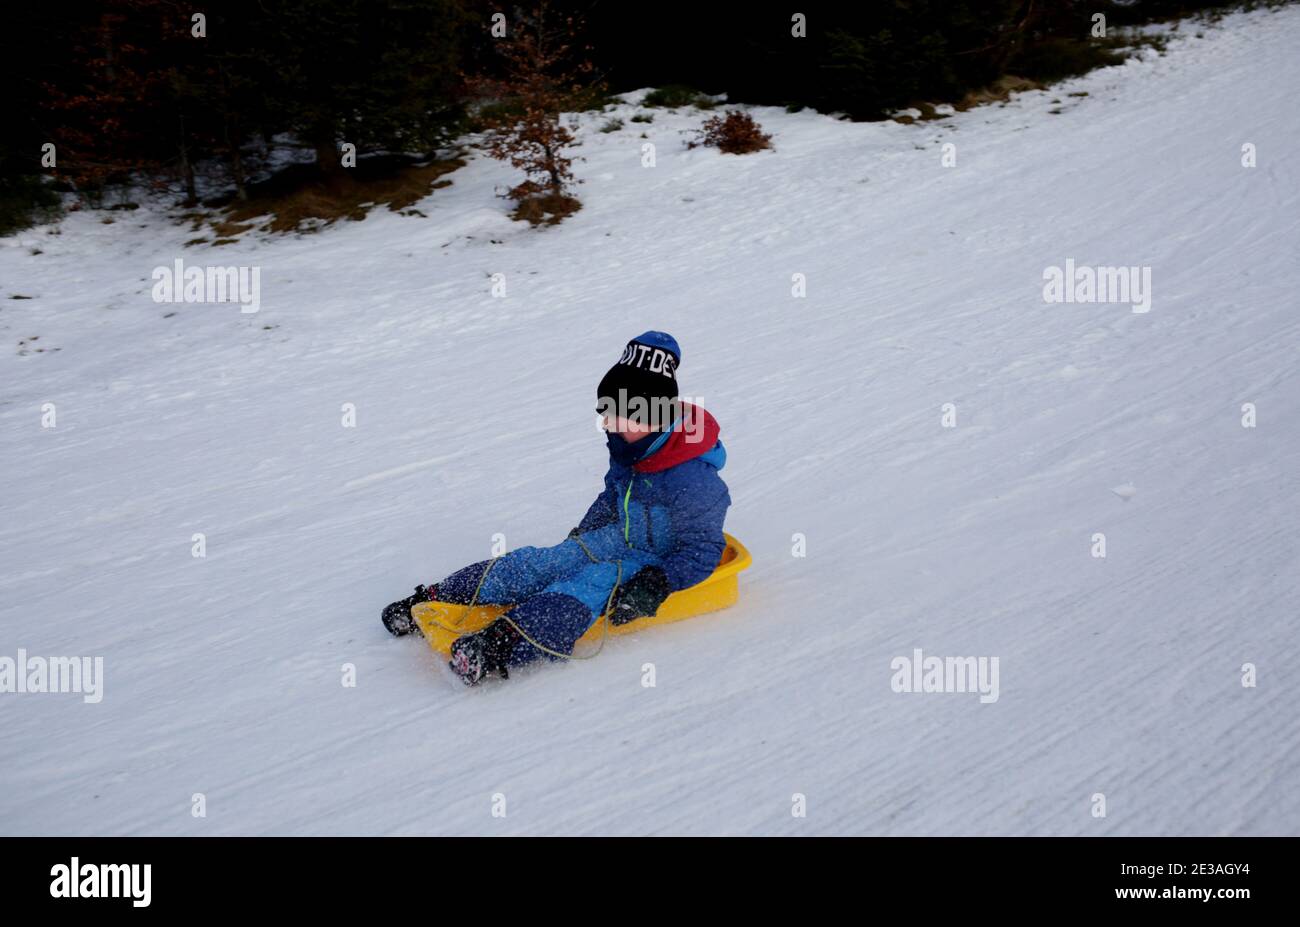 Skrzyczne, Poland - January 17, 2021: A little boy rides a sledge on the top of Skrzyczne in the Silesian Beskids Stock Photo